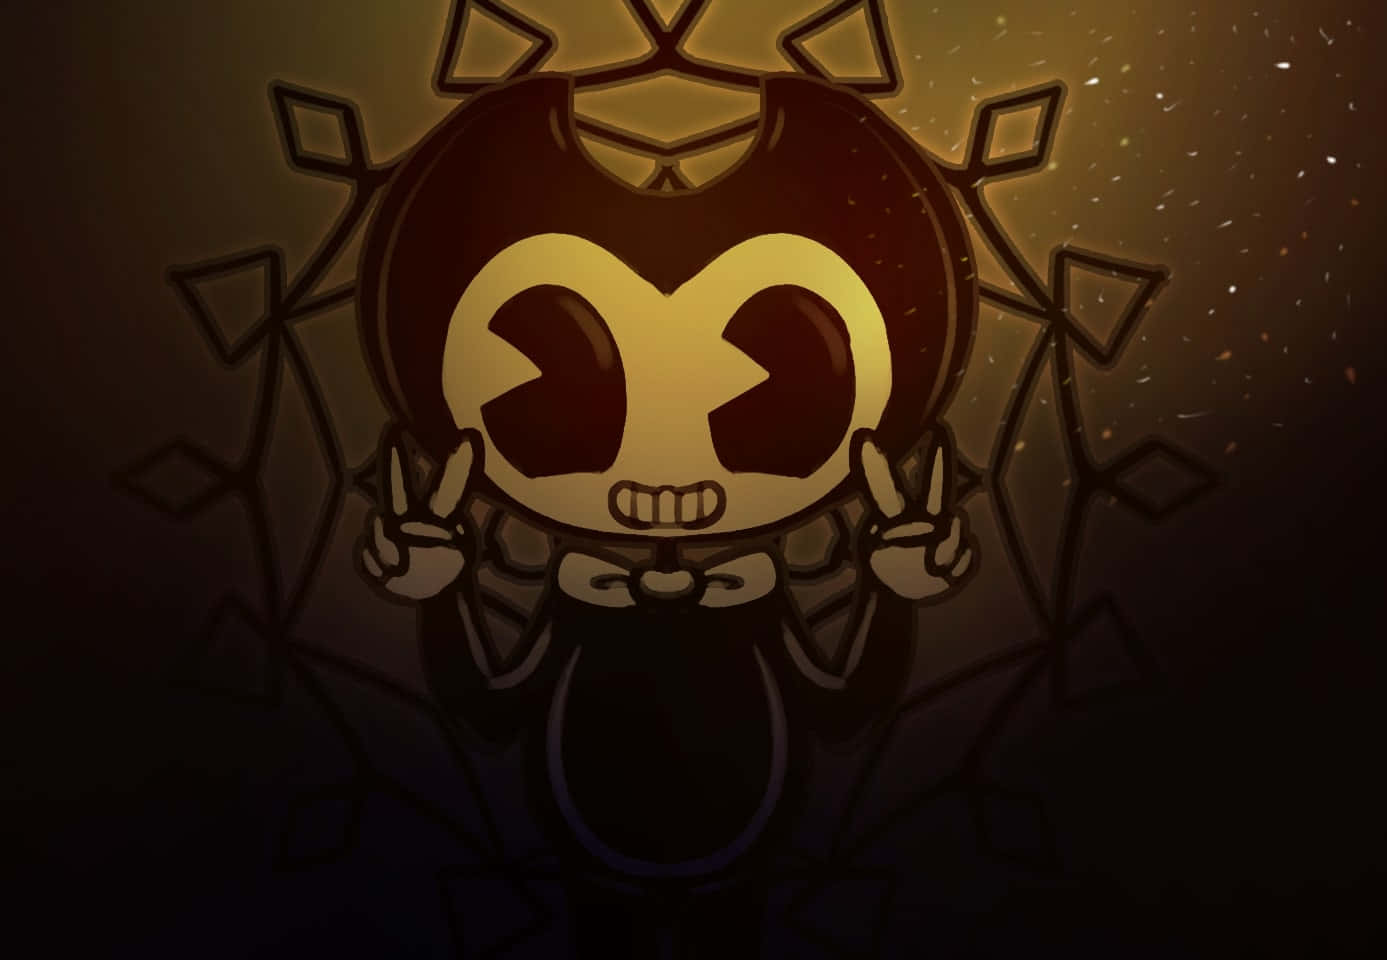 A Sinister Glance from Bendy Wallpaper